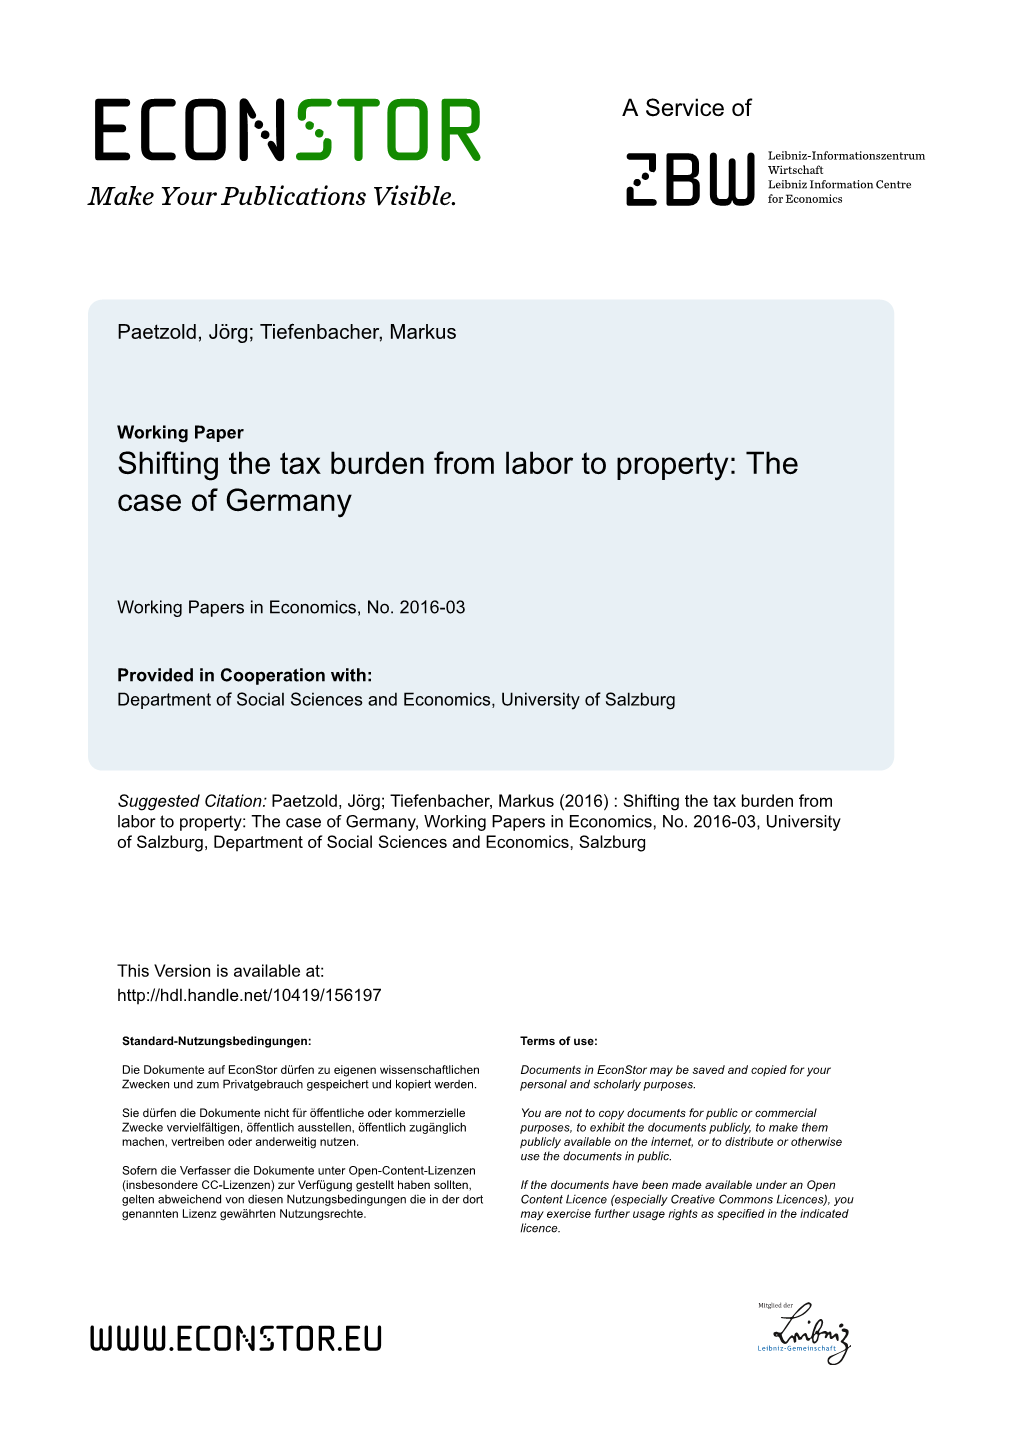 Shifting the Tax Burden from Labor to Property: the Case of Germany